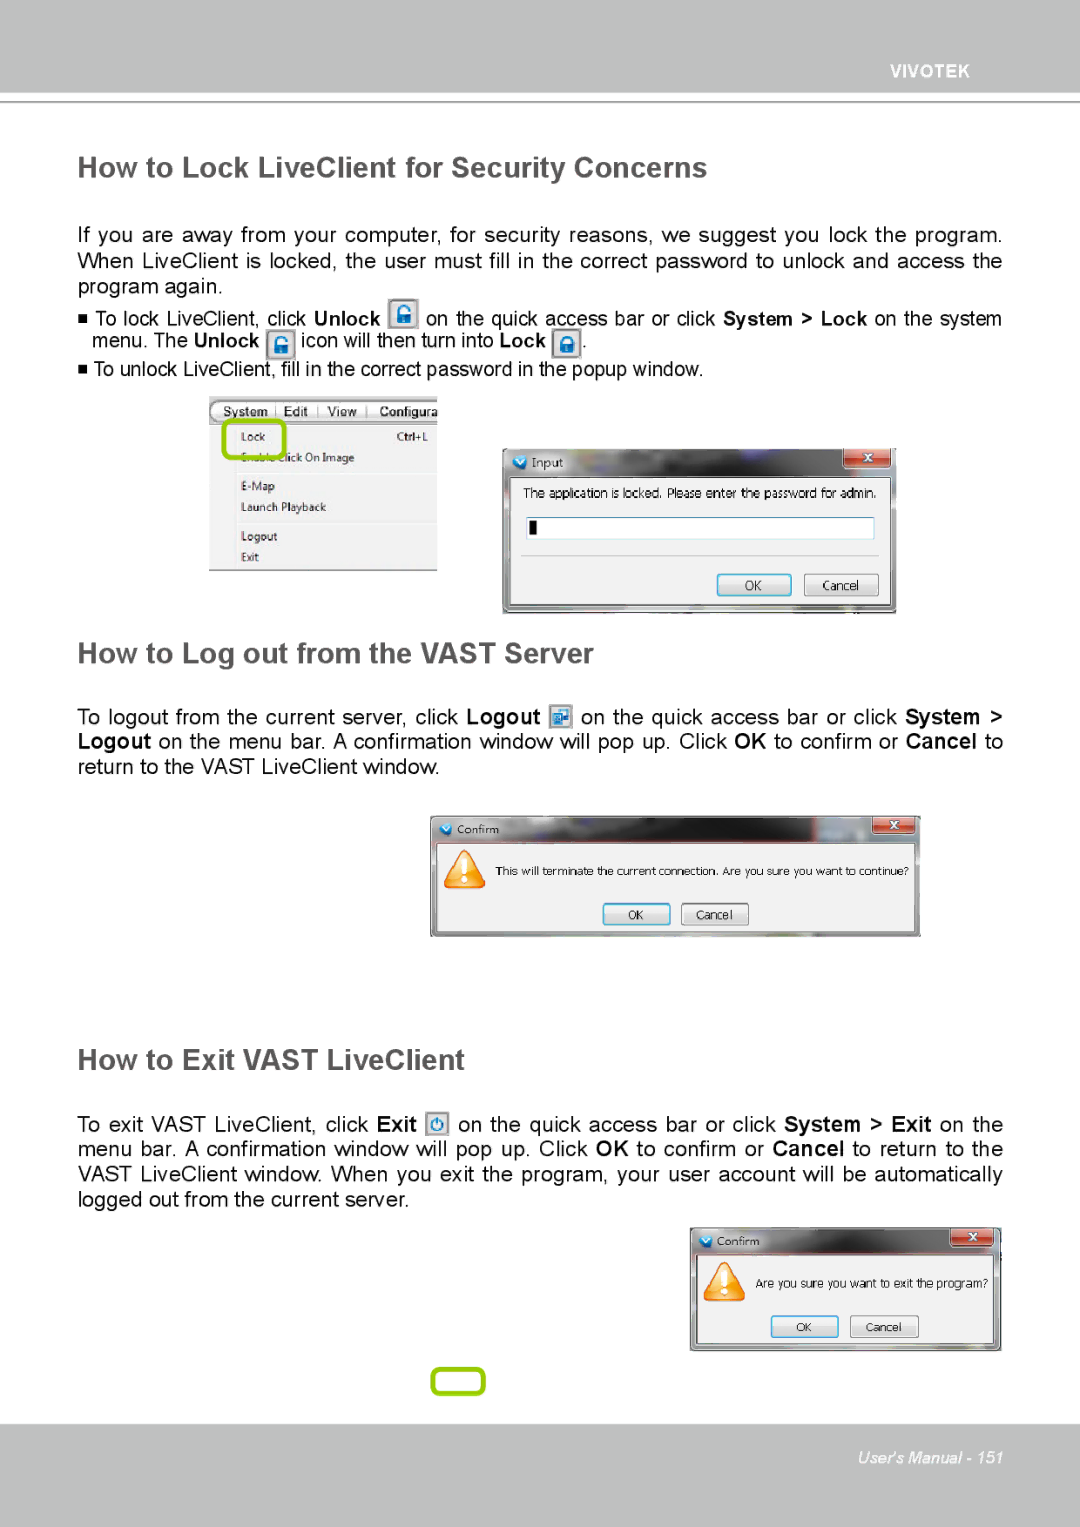 Vivotek ND4801 user manual How to Lock LiveClient for Security Concerns, How to Log out from the Vast Server 